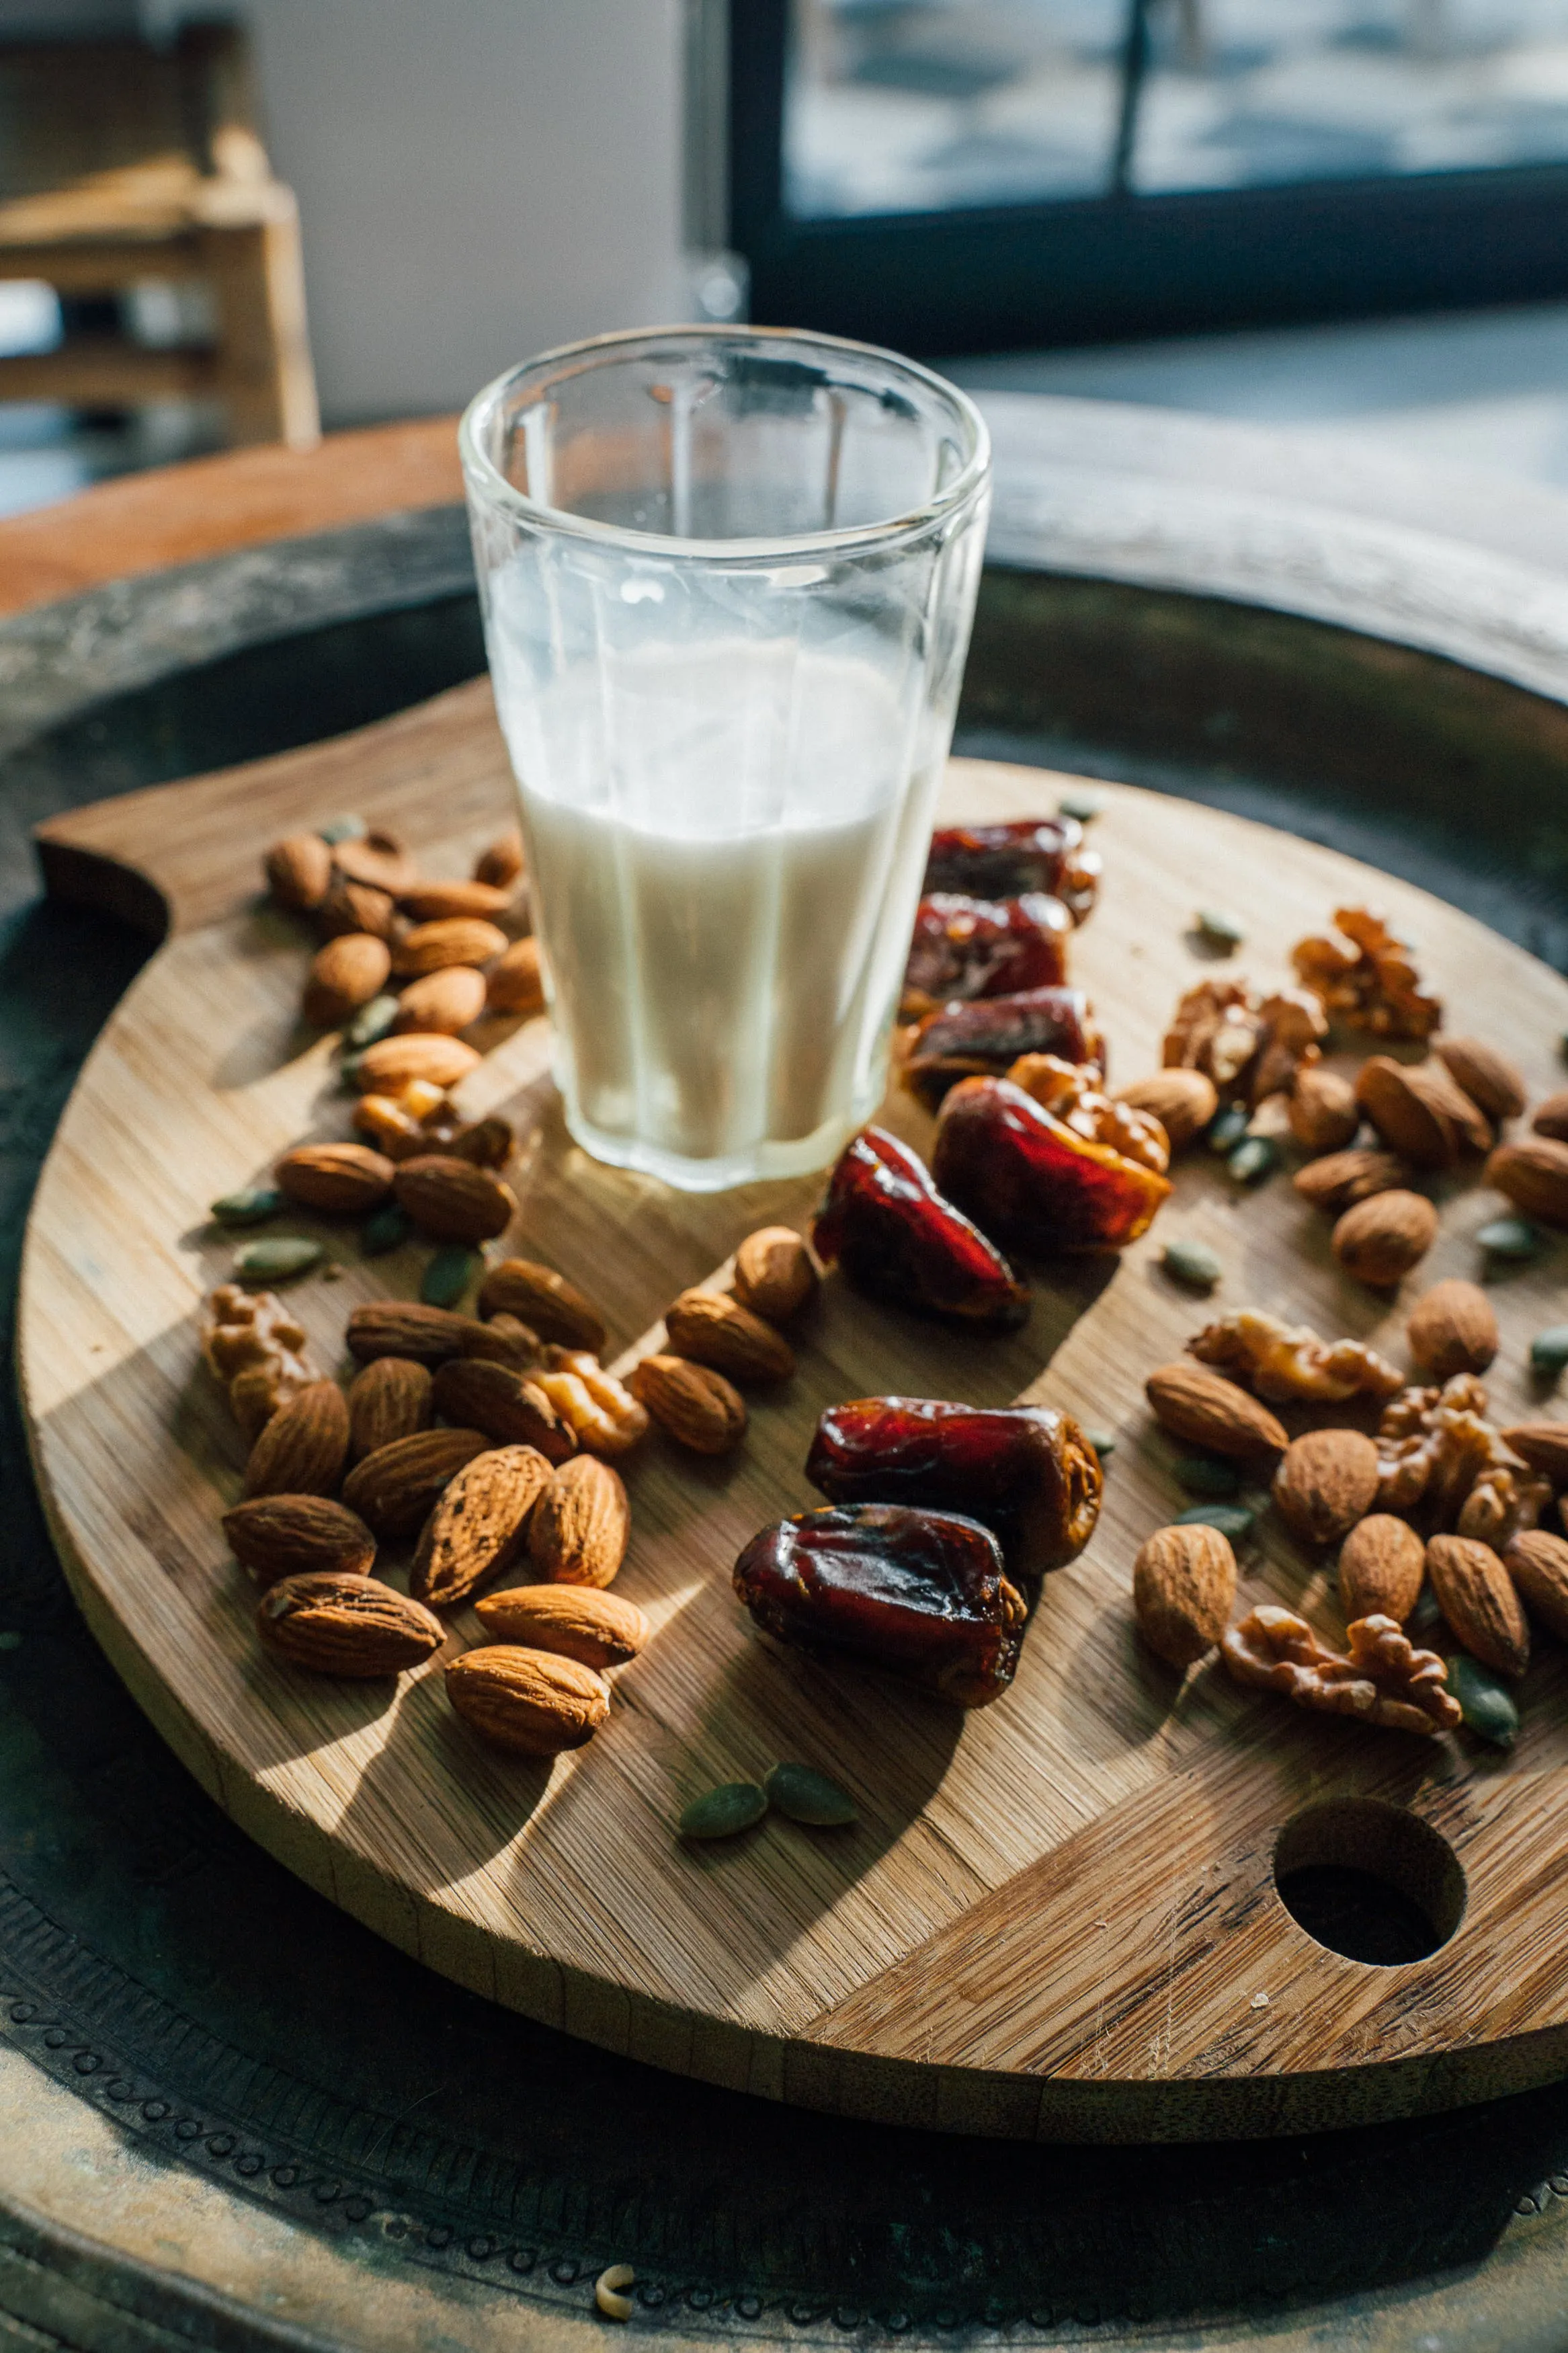 Nuts and a glass of milk on a wooden board